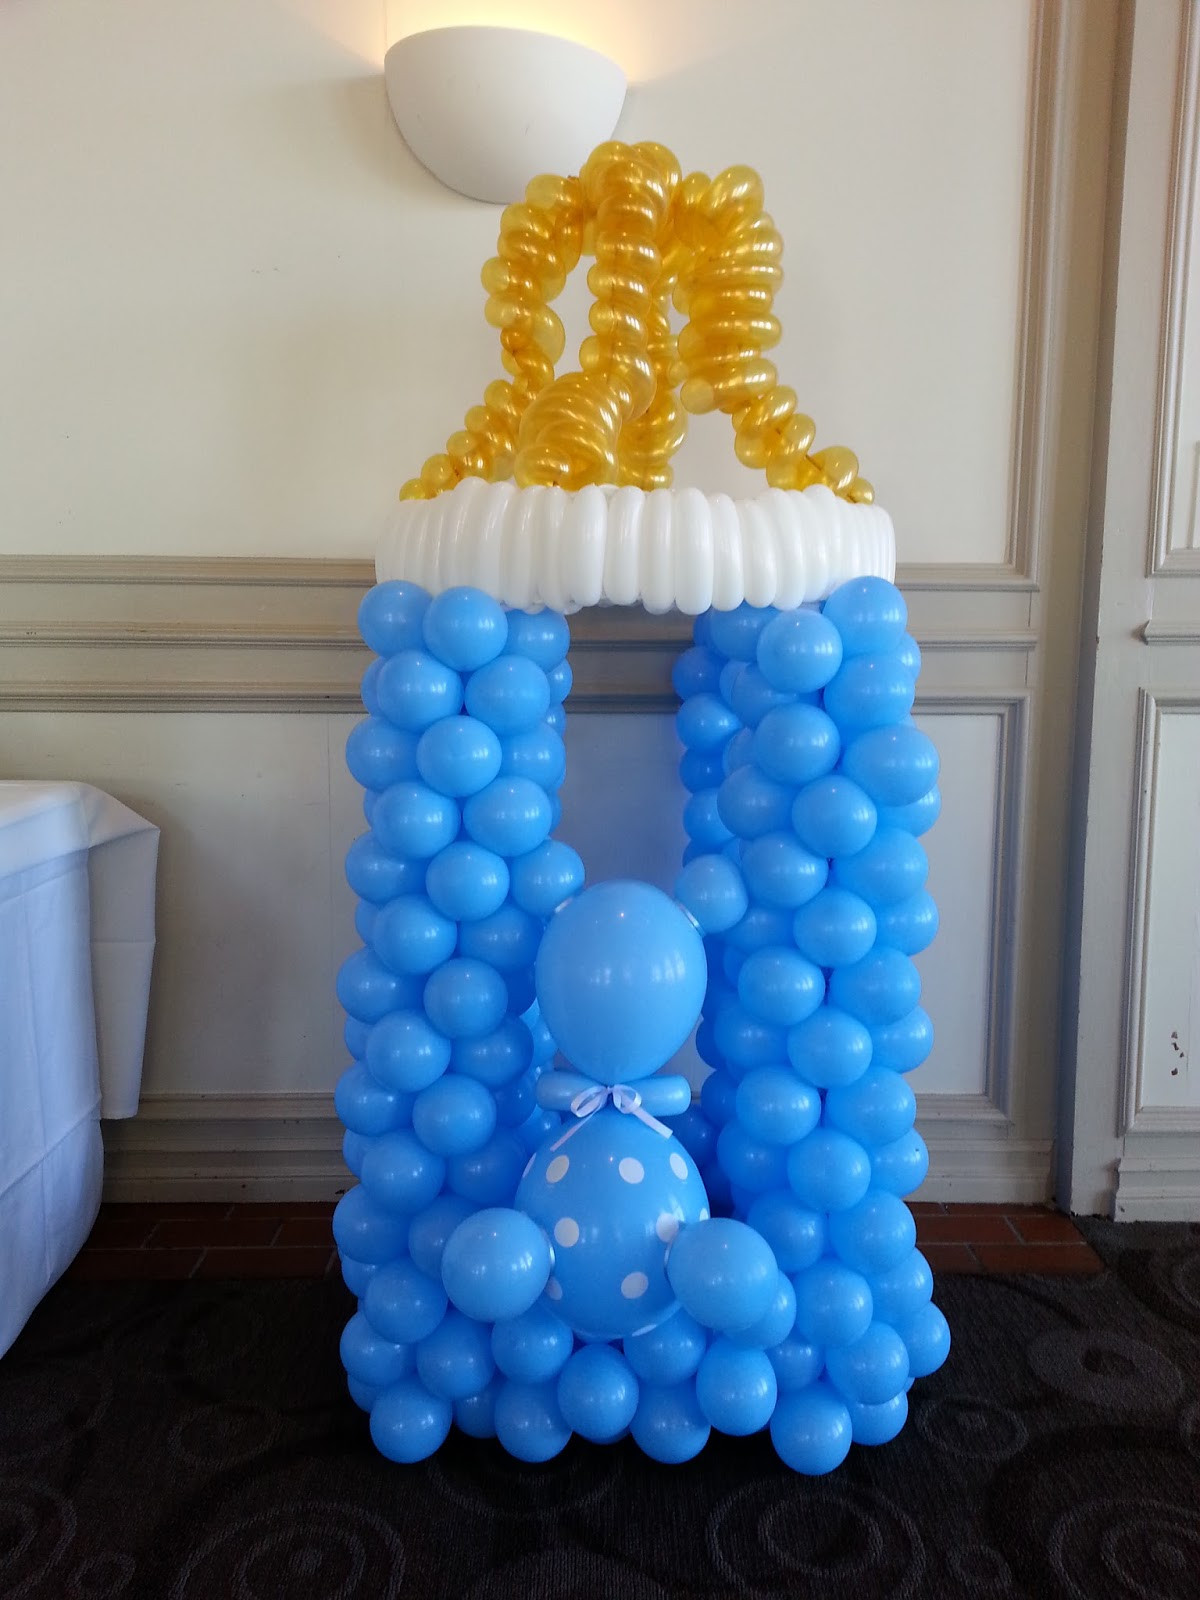 Baby Shower Balloon Decoration Ideas
 PoP Balloons A baby shower for a boy